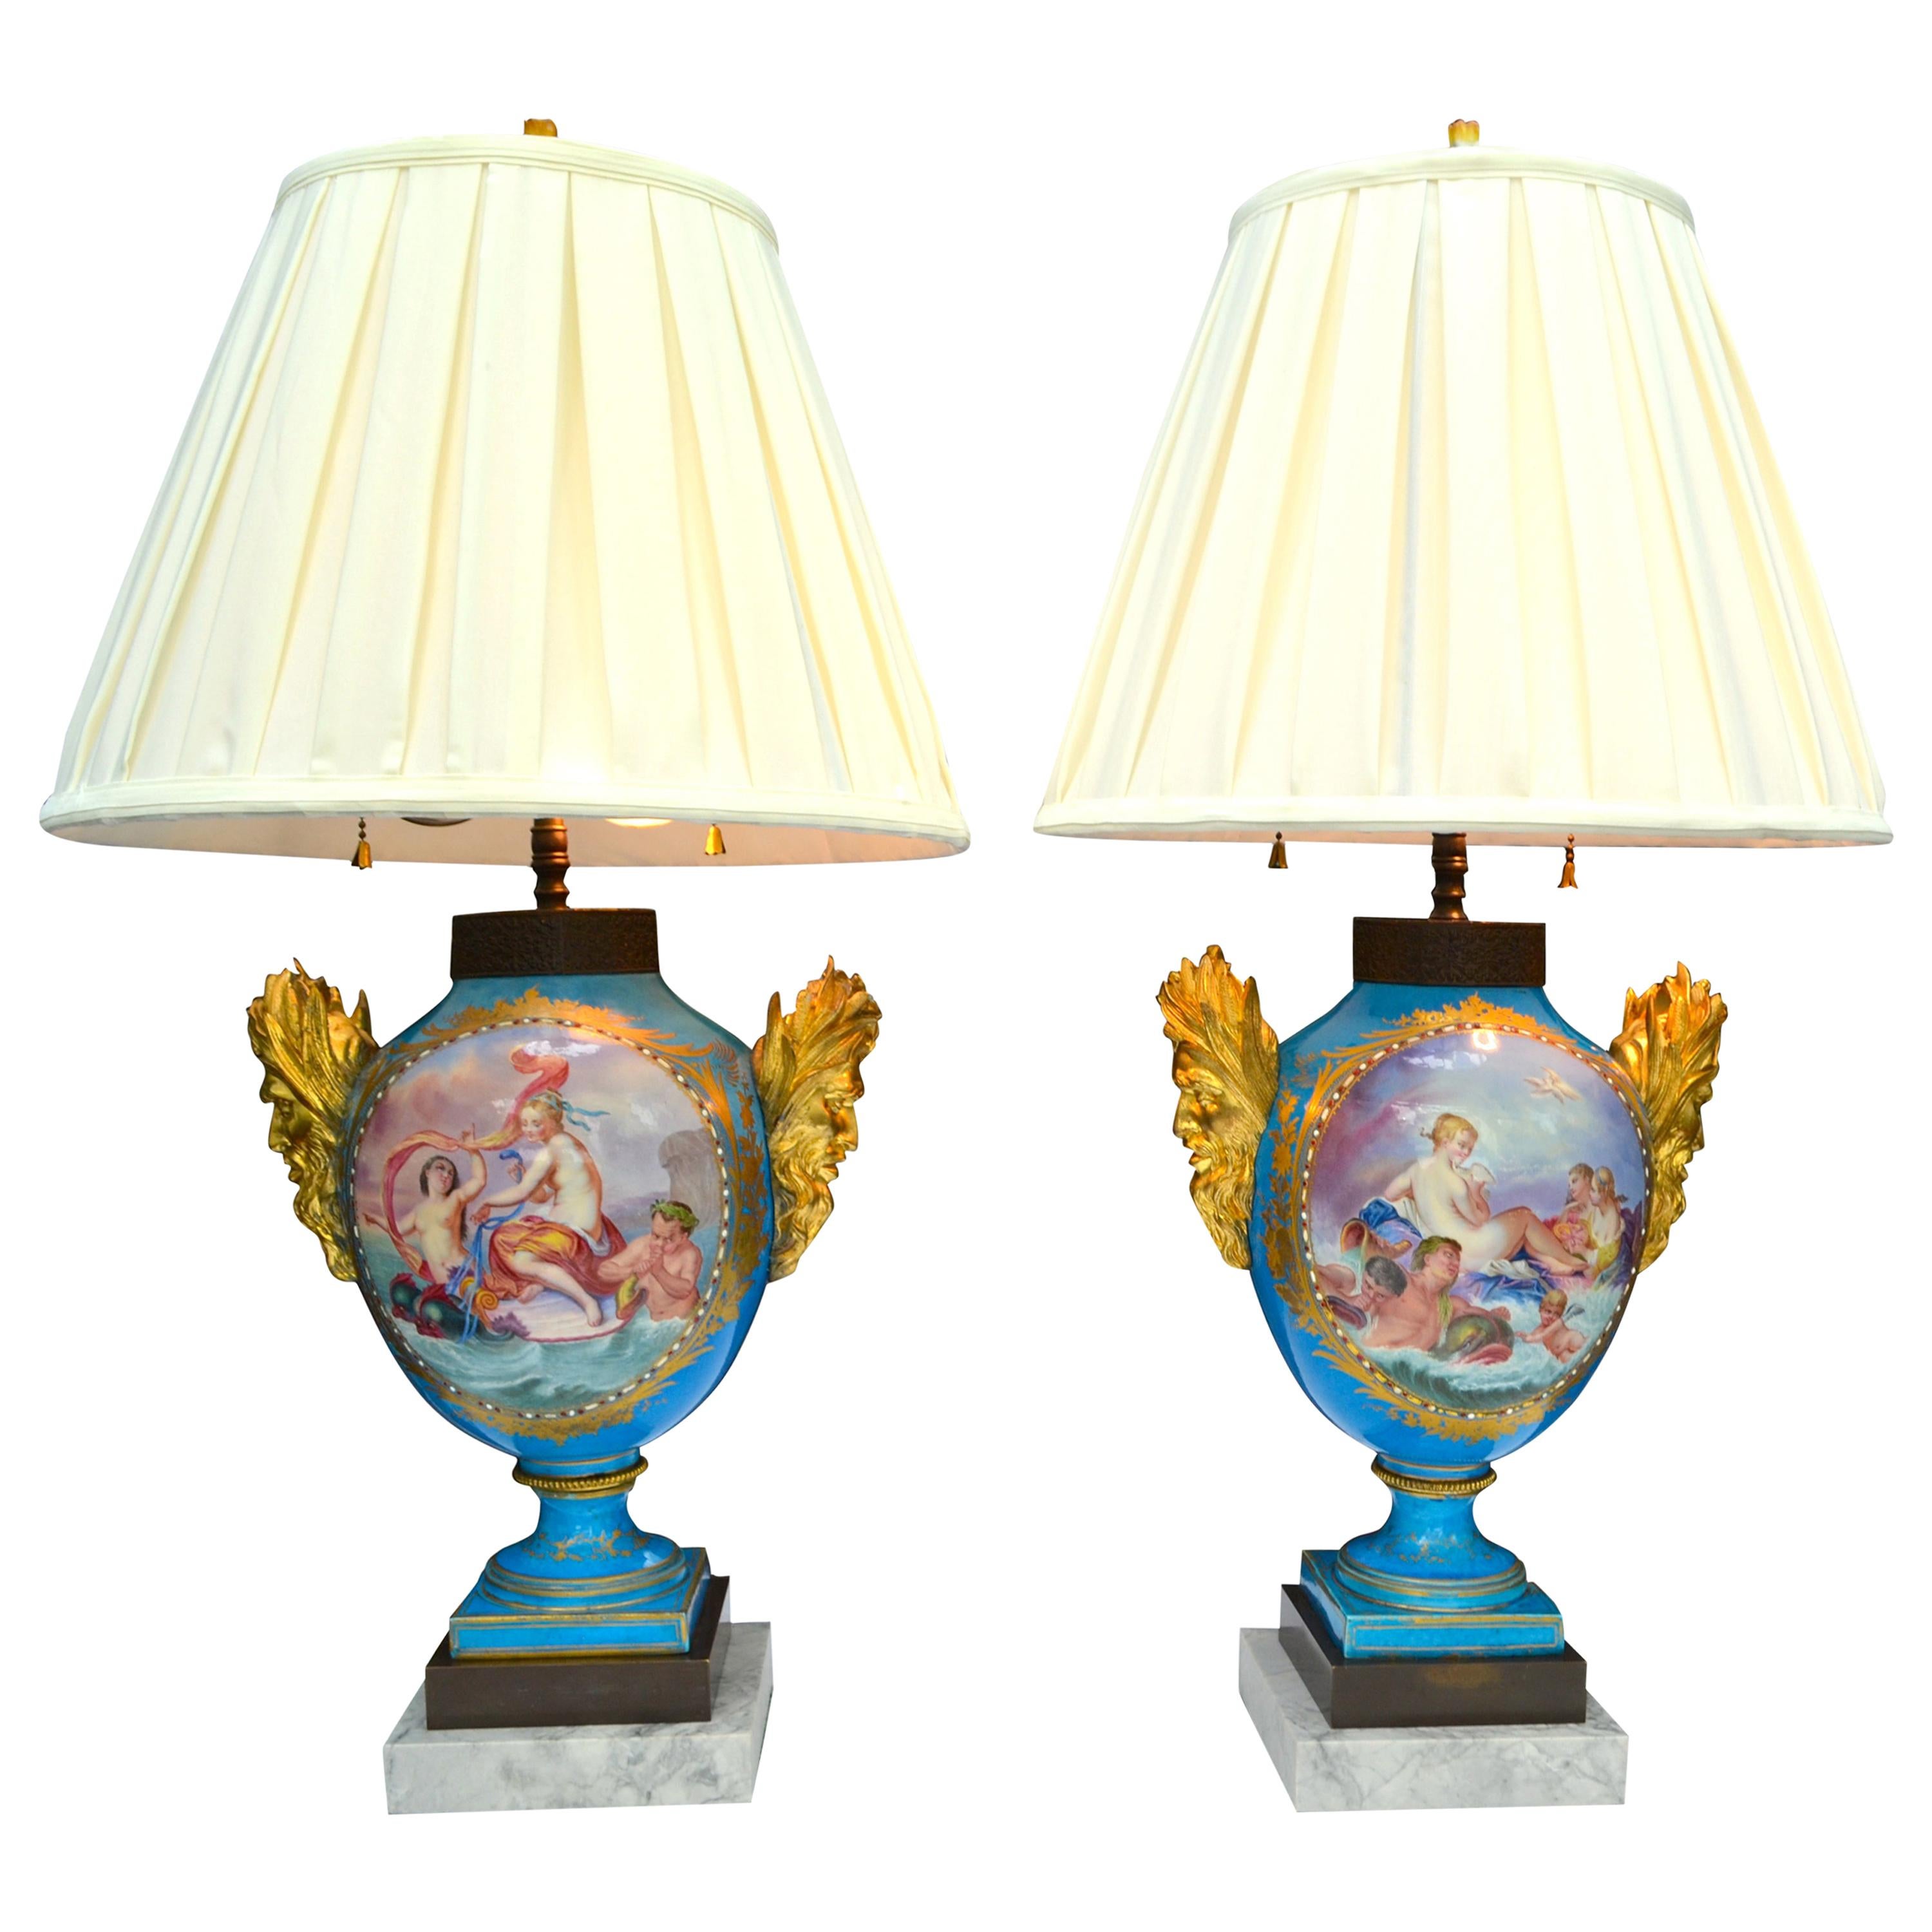 Pair of 19th Century Sèvres and Gilt Bronze Baluster Vase Lamps